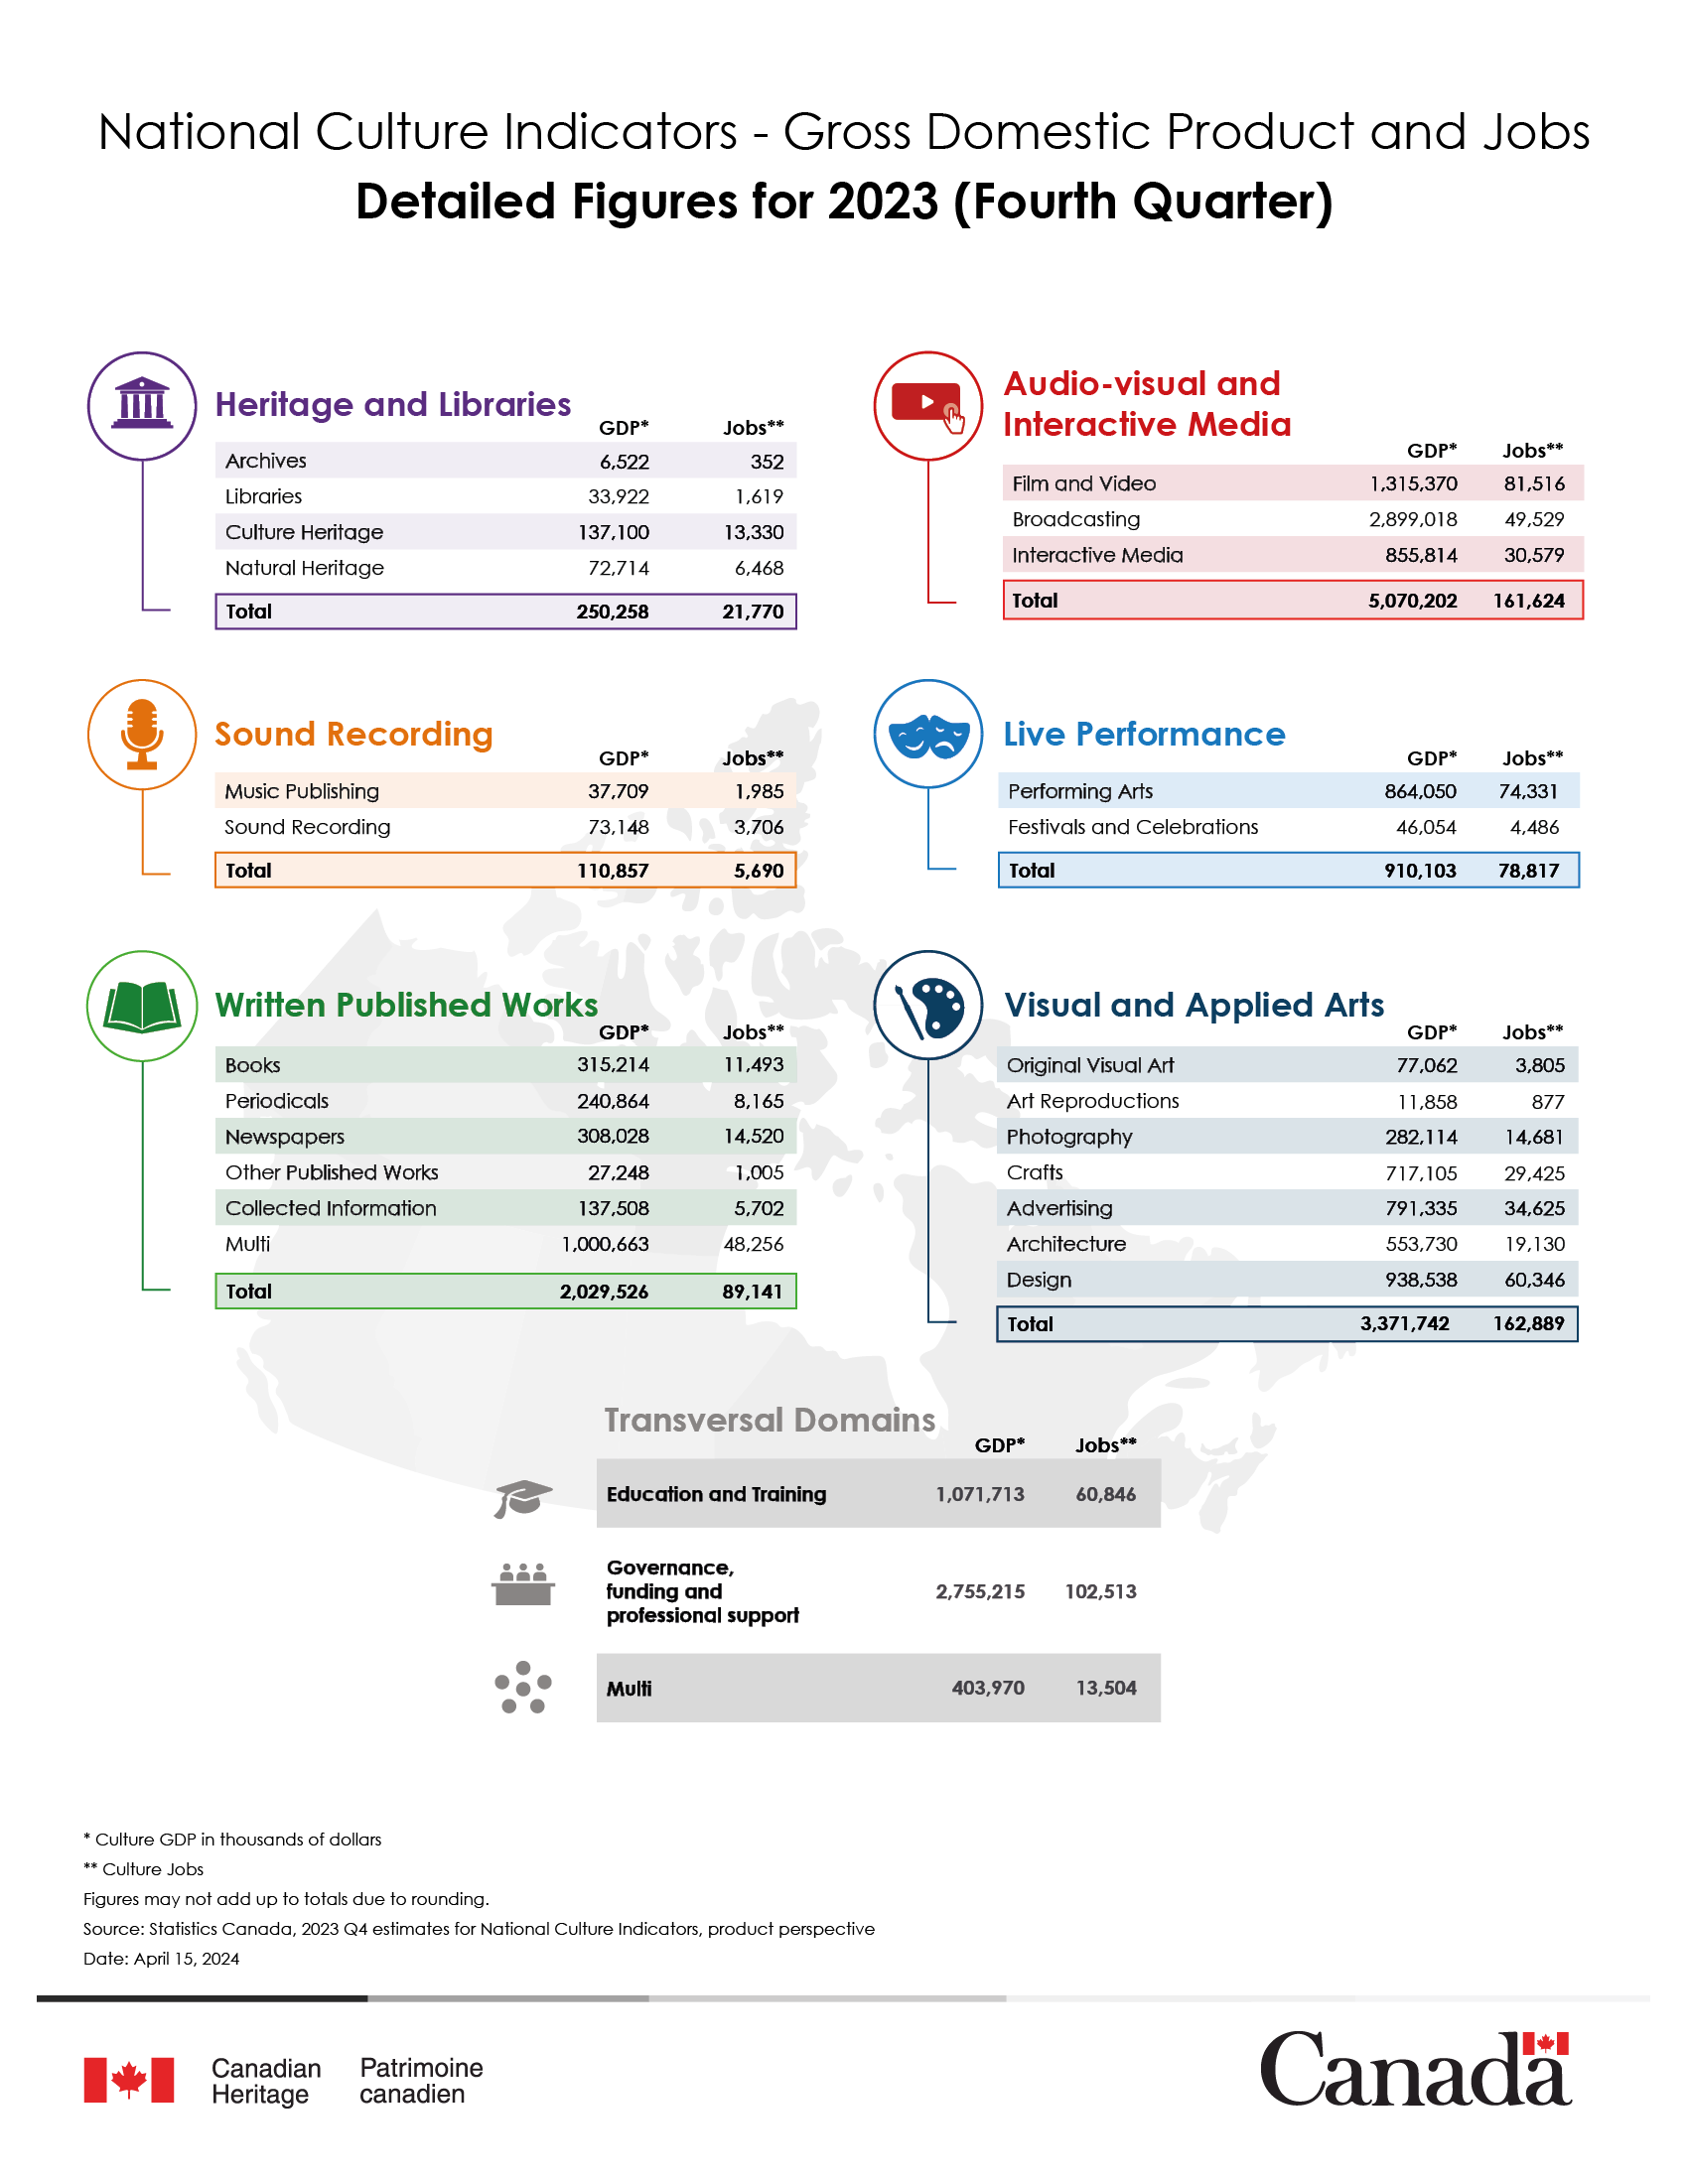 Infographic National Culture Indicators - Gross Domestic Product and Jobs - Detailed Figures for Fourth Quarter of 2023